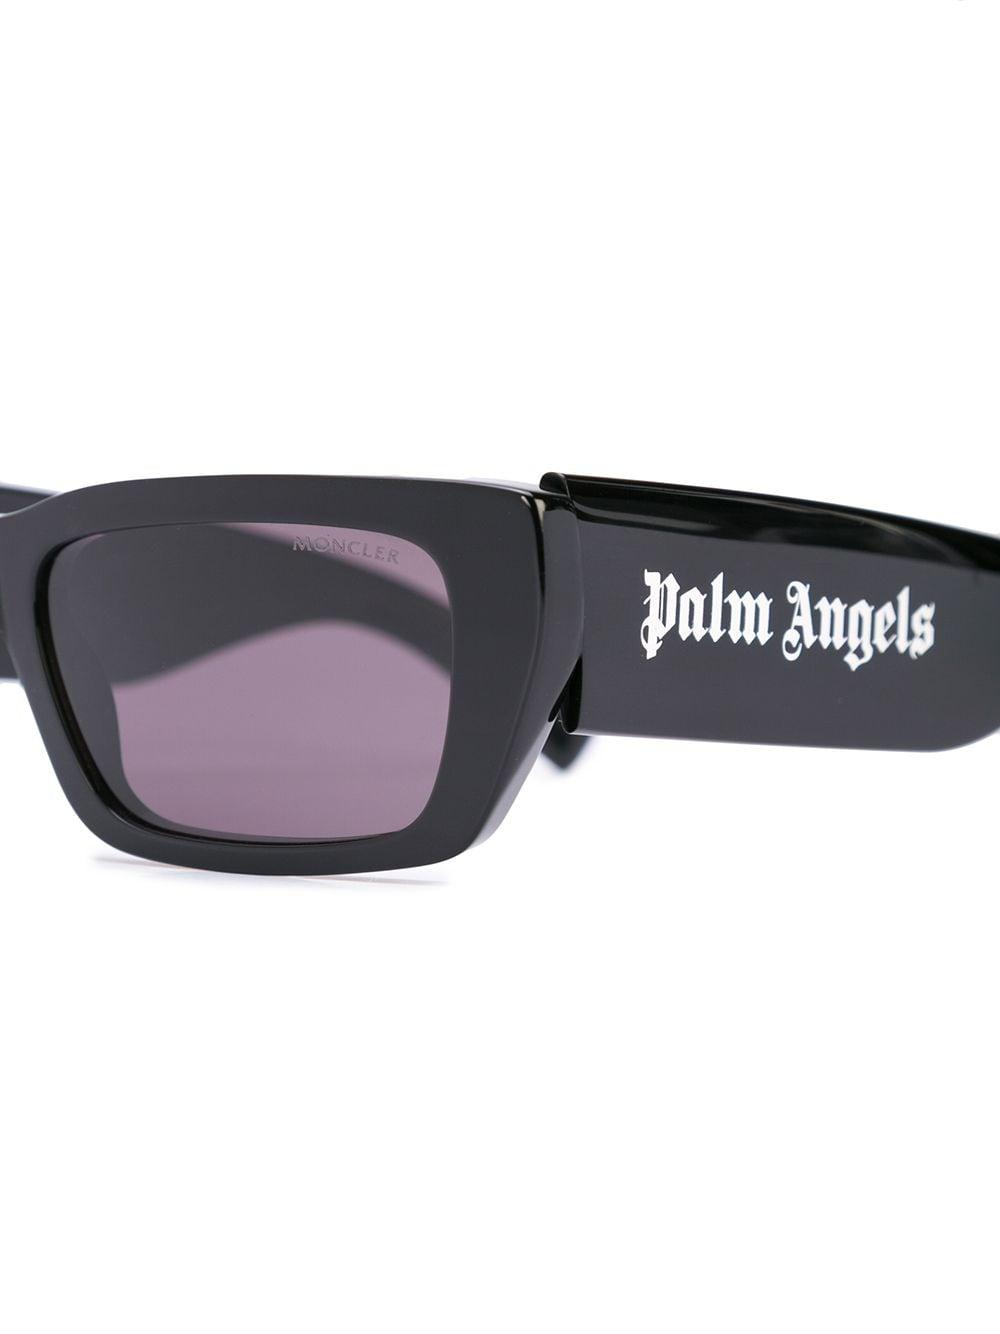 Moncler Palm Angels Sunglasses, Buy Now, Hotsell, 55% OFF,  www.officelist.com